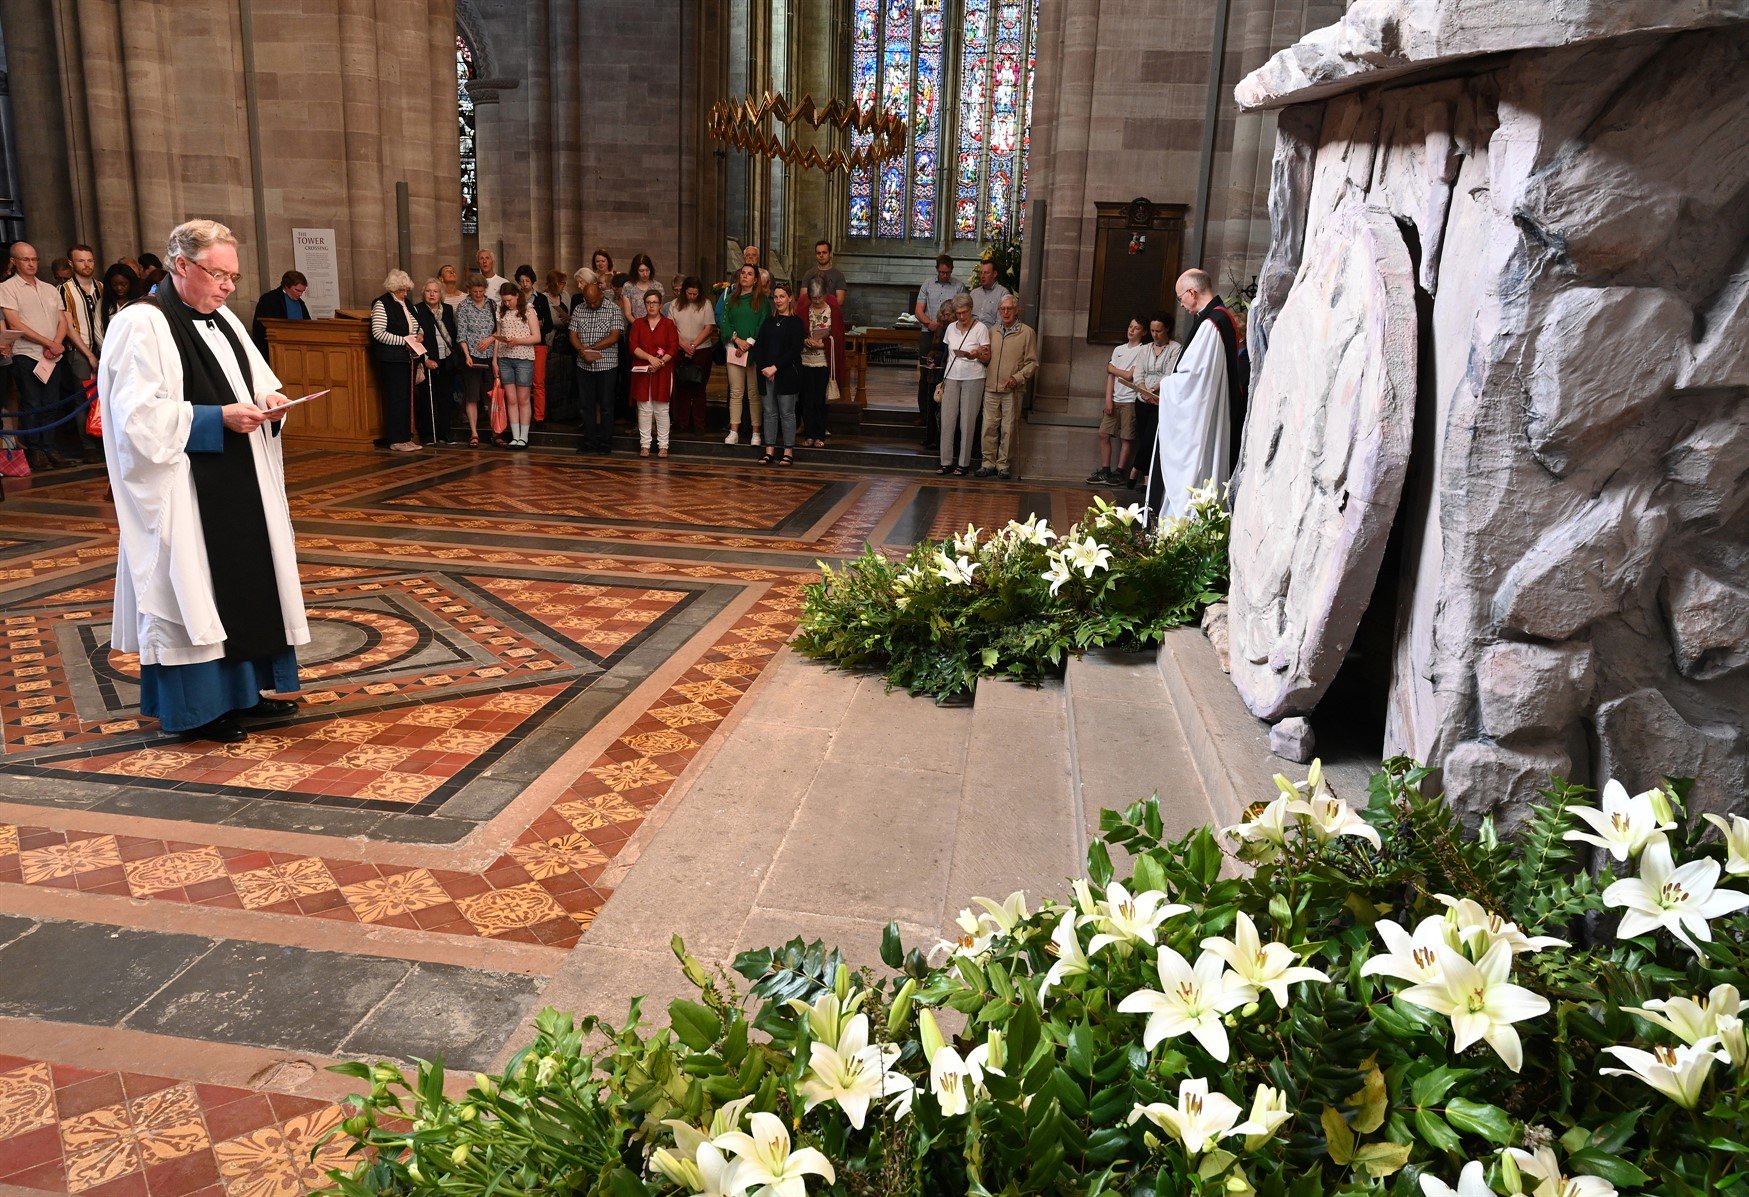 EASTER | A message from the Dean of Hereford Cathedral